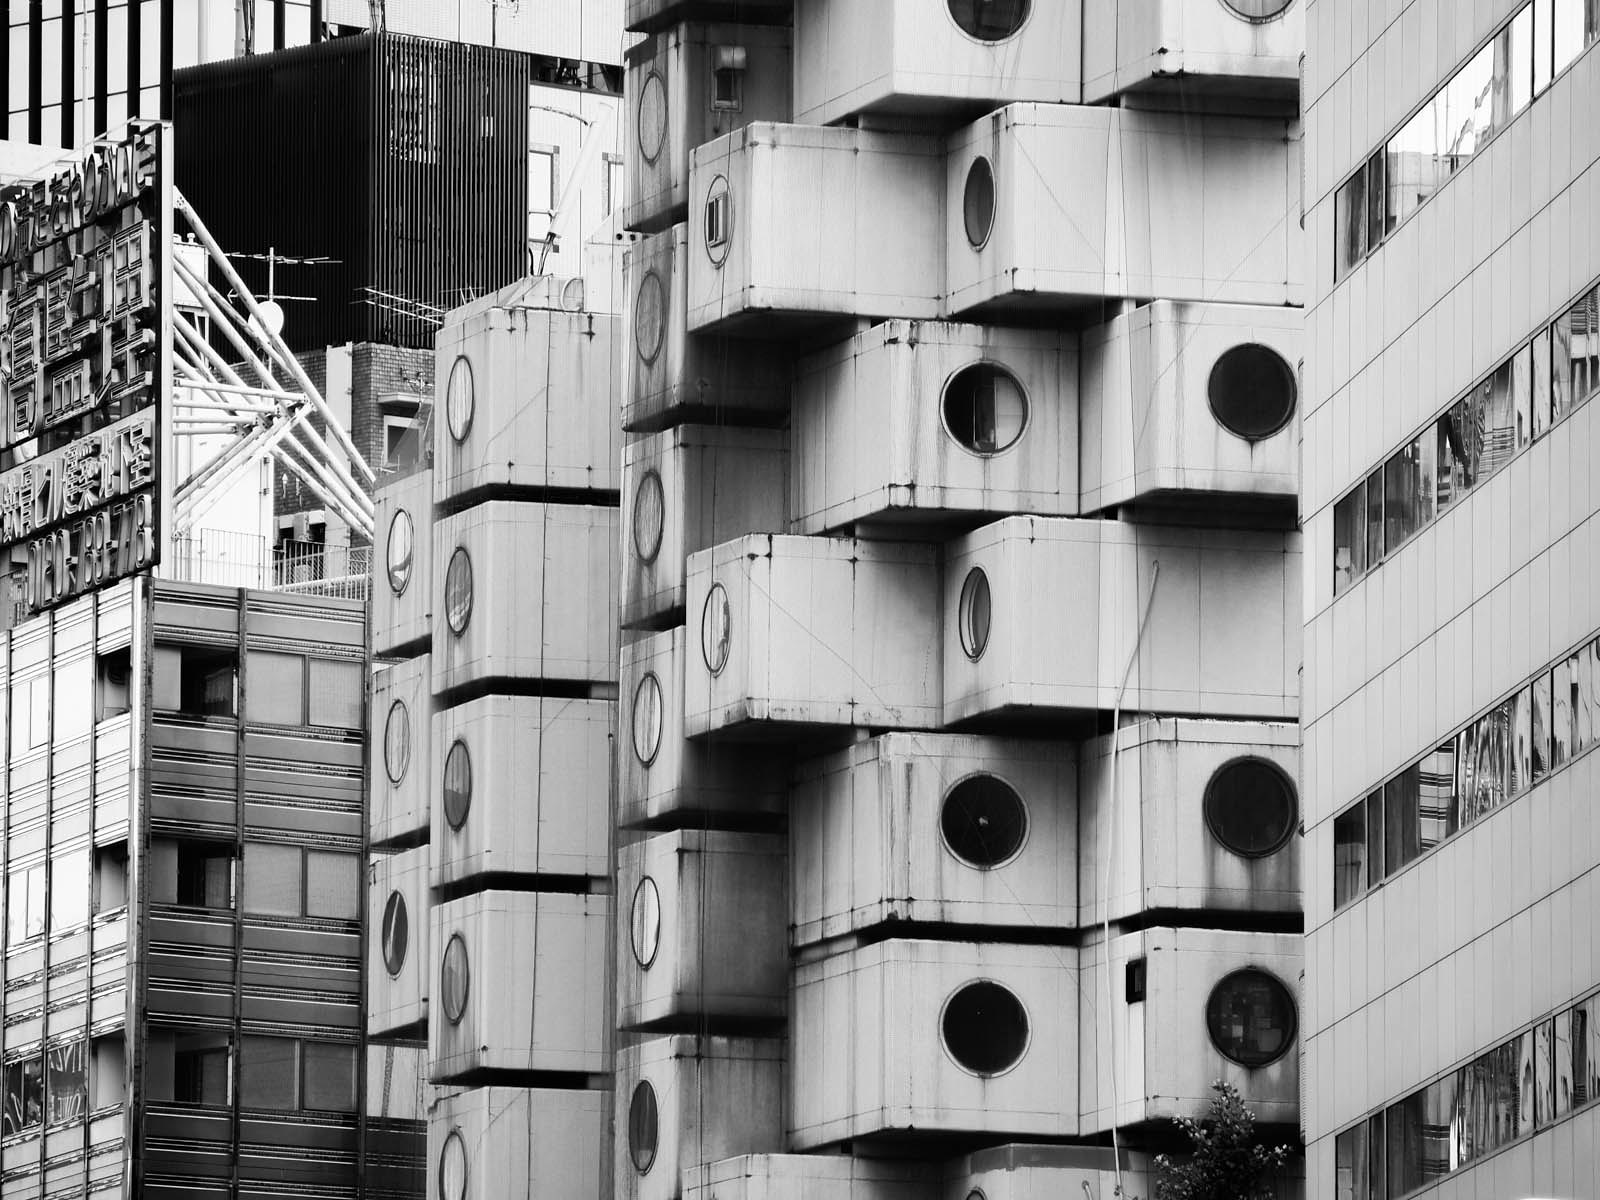 The Nakagin Capsule Tower, an iconic collection of stacked concrete cubes